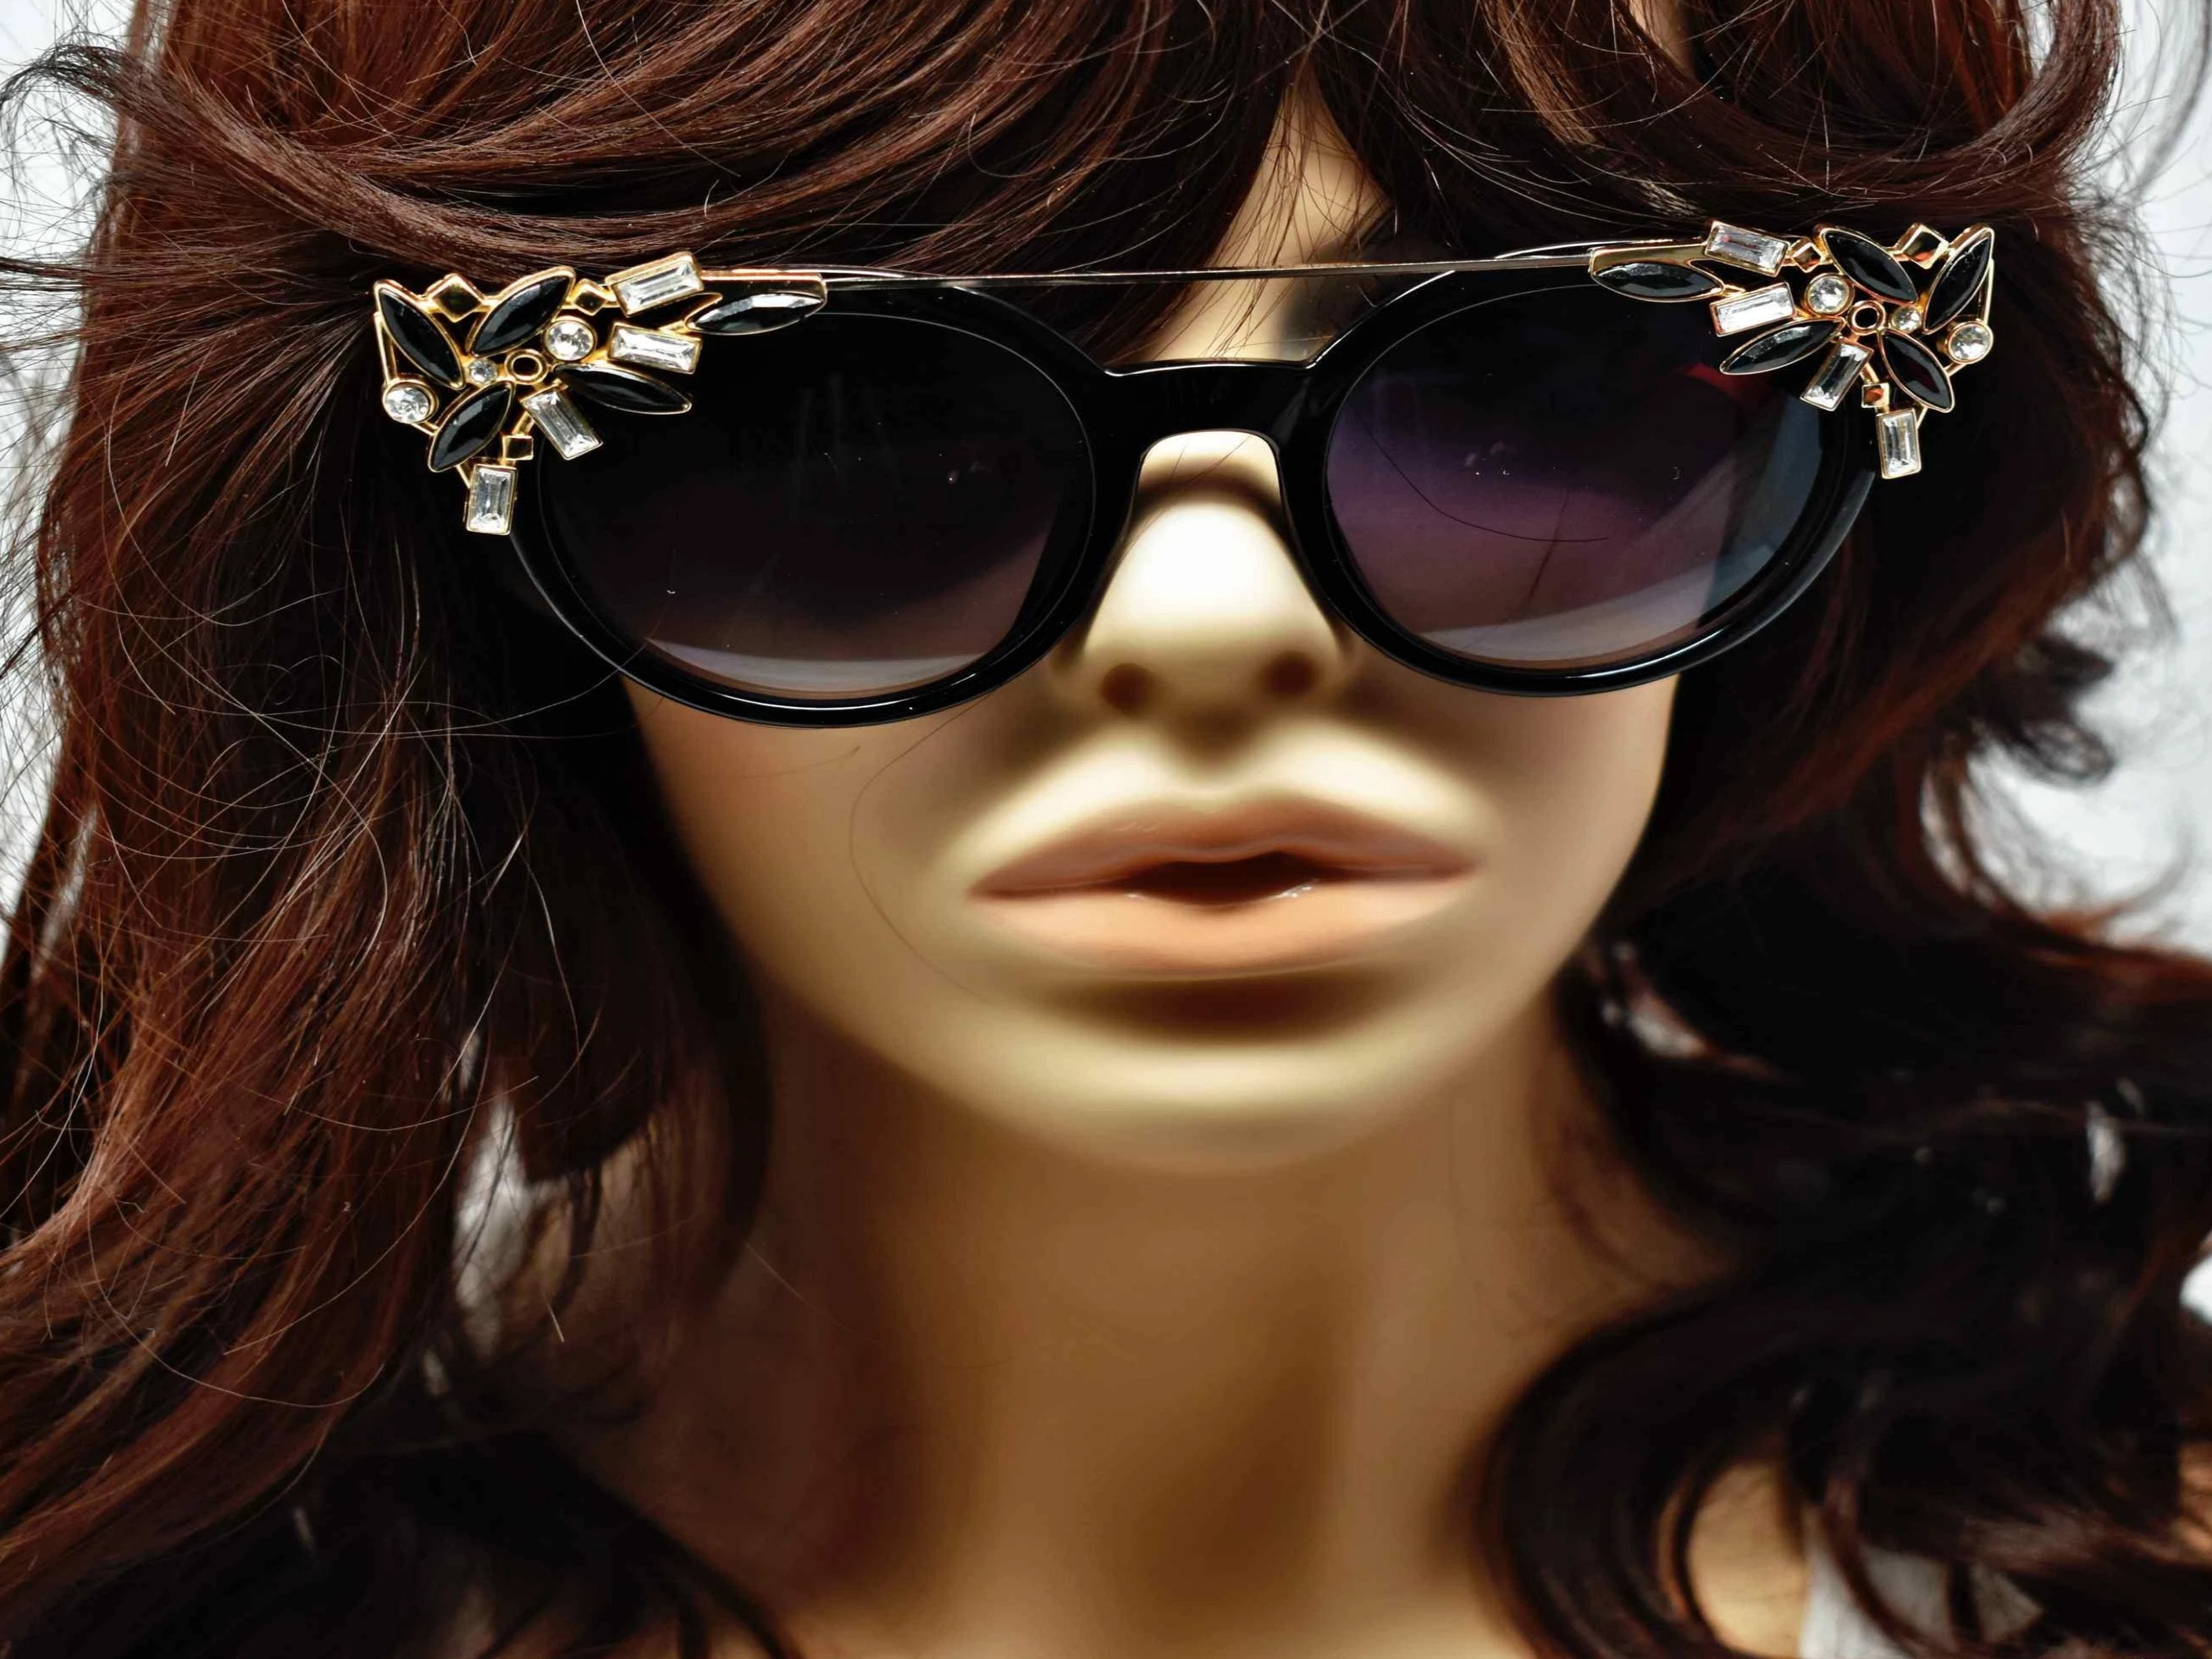 Trend setter and attention getter is what they will call you in these Pansy Black sunglasses with a sleek gold trim adorned in clear and black gems, in a pantos style frame.